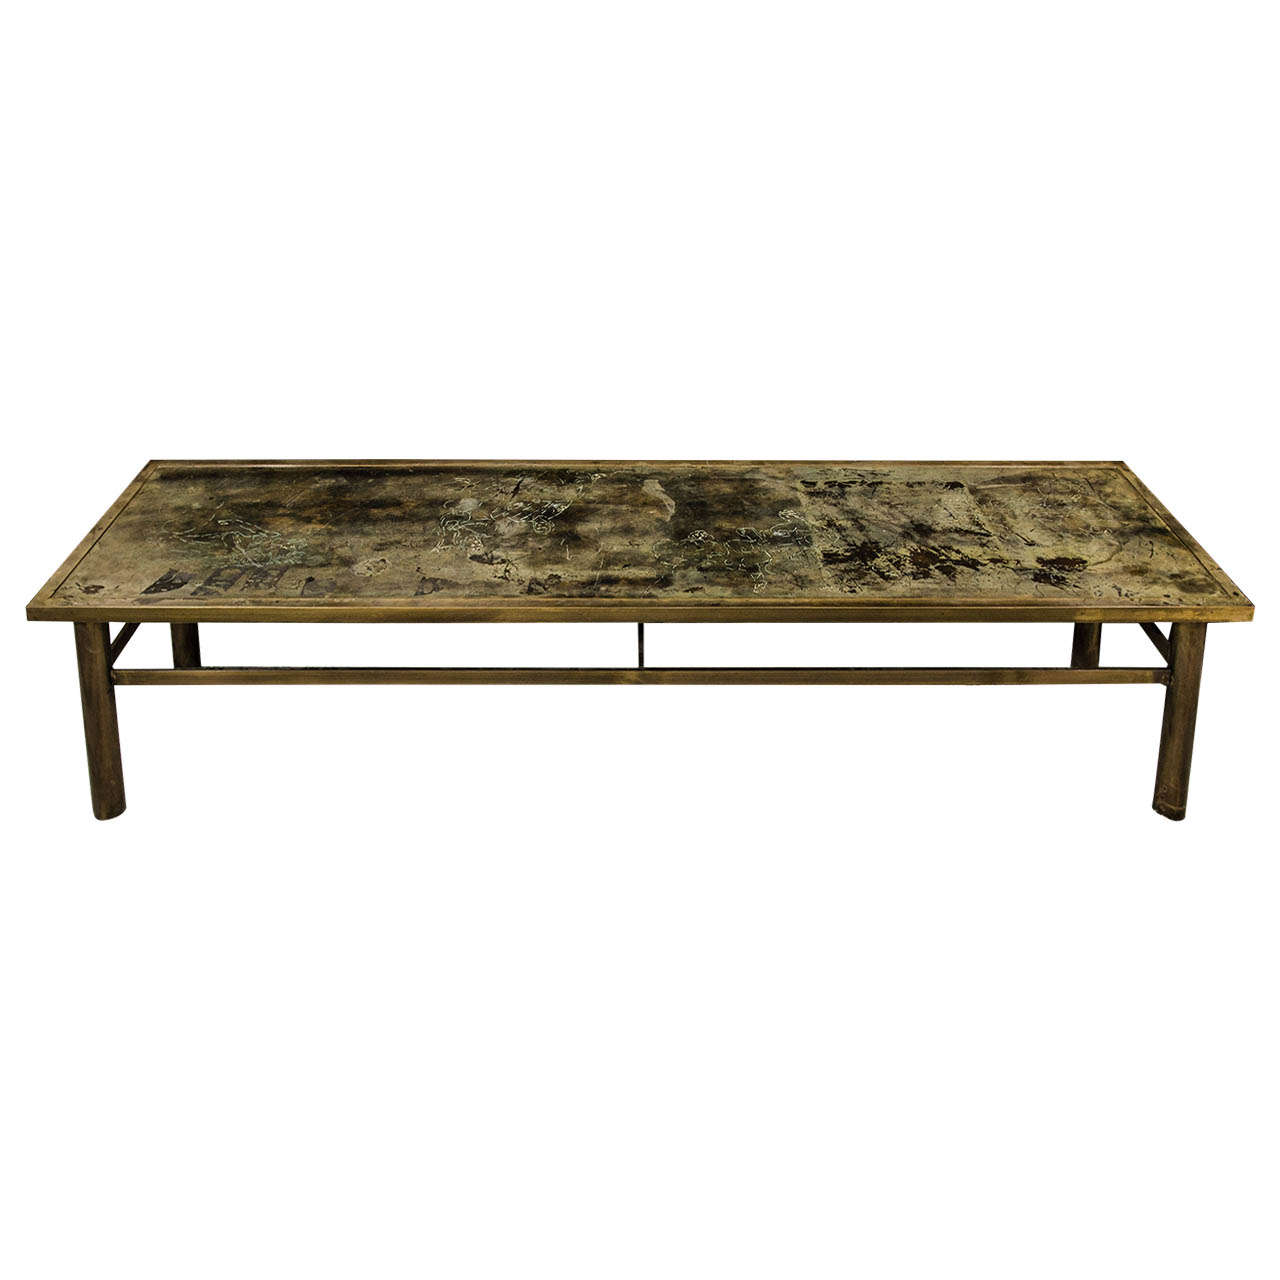 Laverne bronze coffee table - Michelangelo For Sale